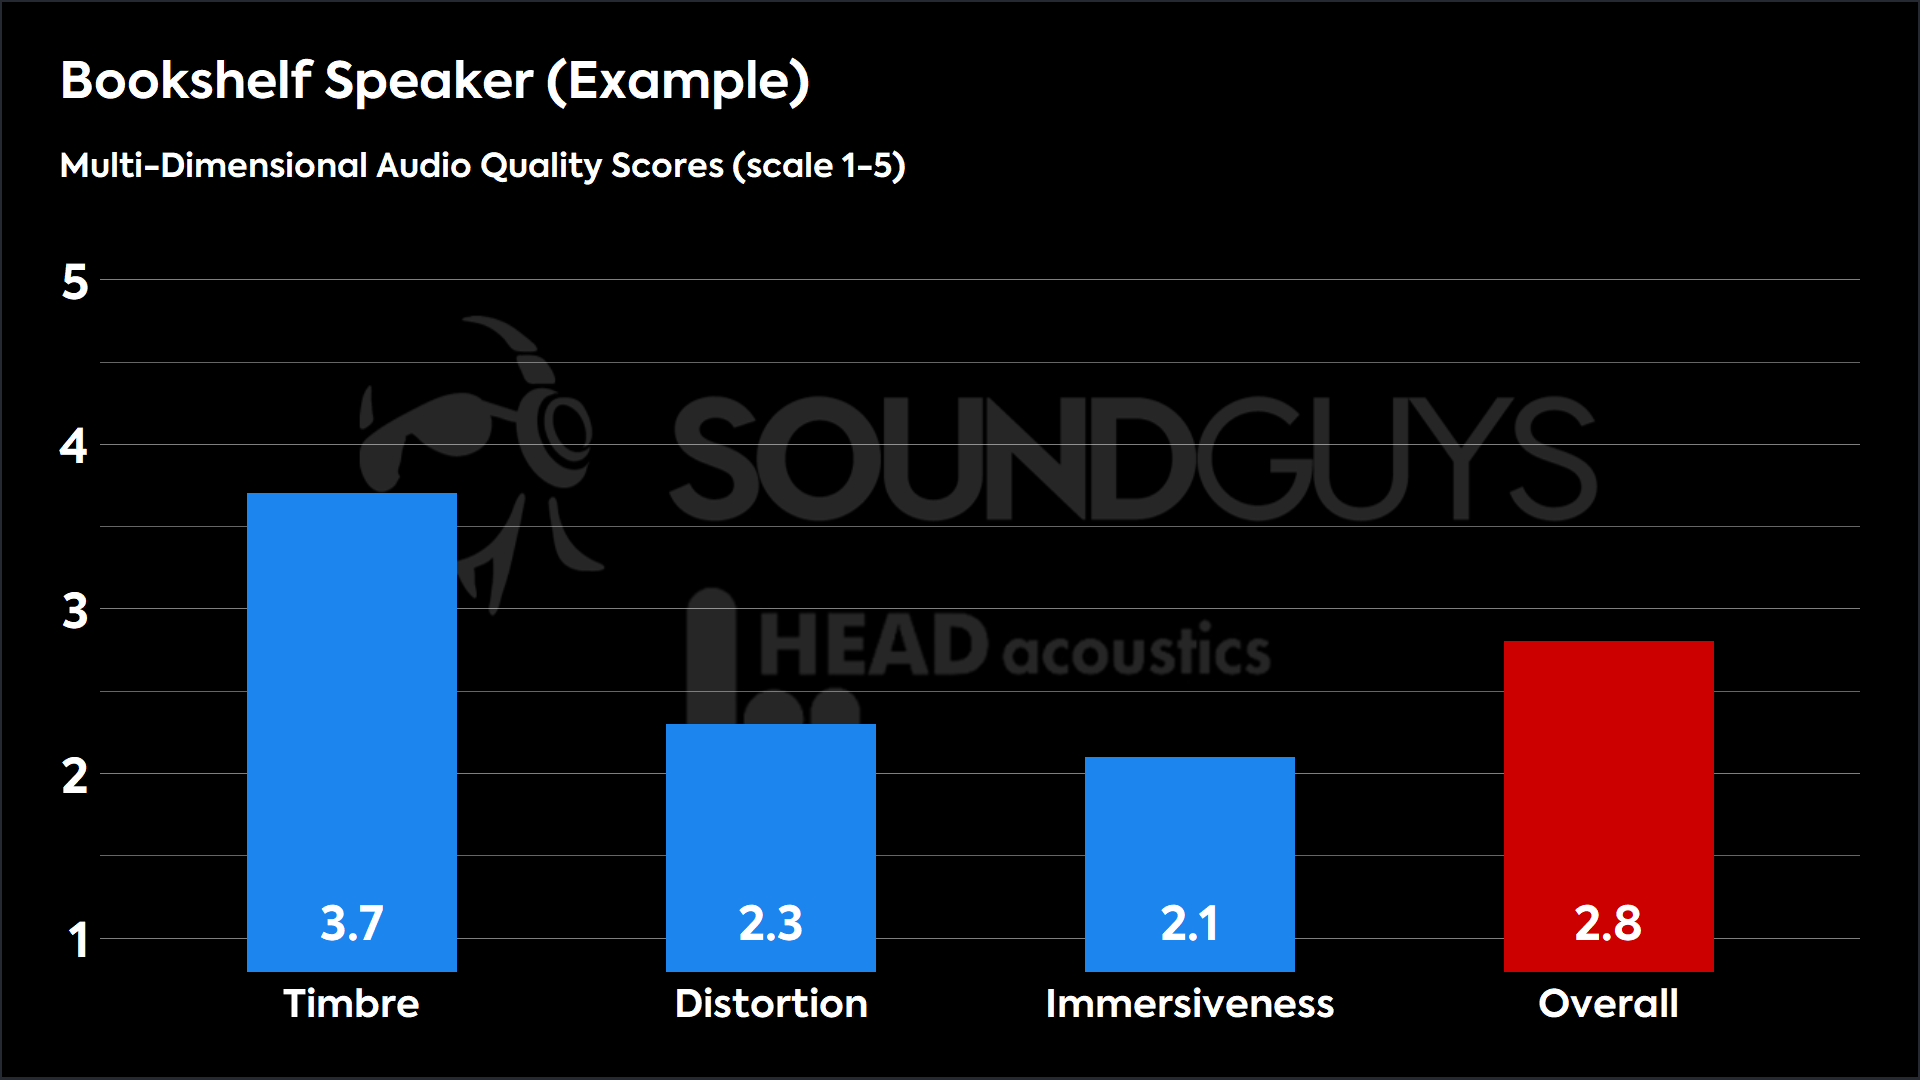 A chart showing the Multi-Dimensional Audio Quality Scores of a fictional example bookshelf speaker.